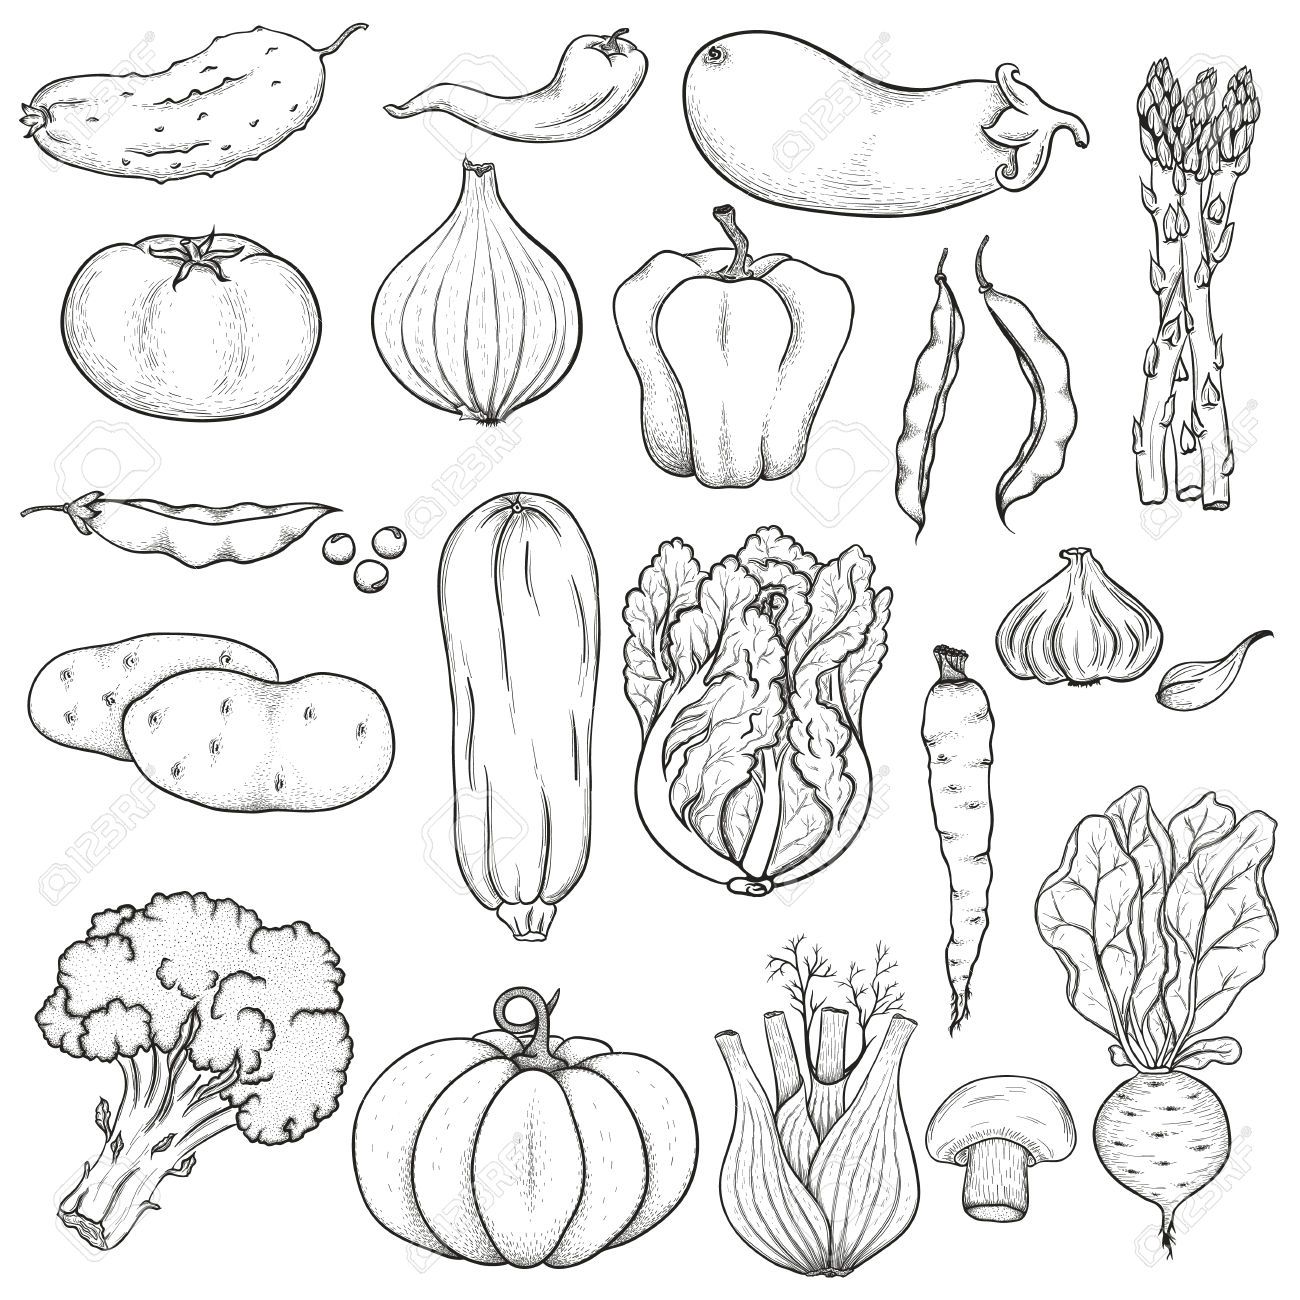 clipart vegetables black and white.